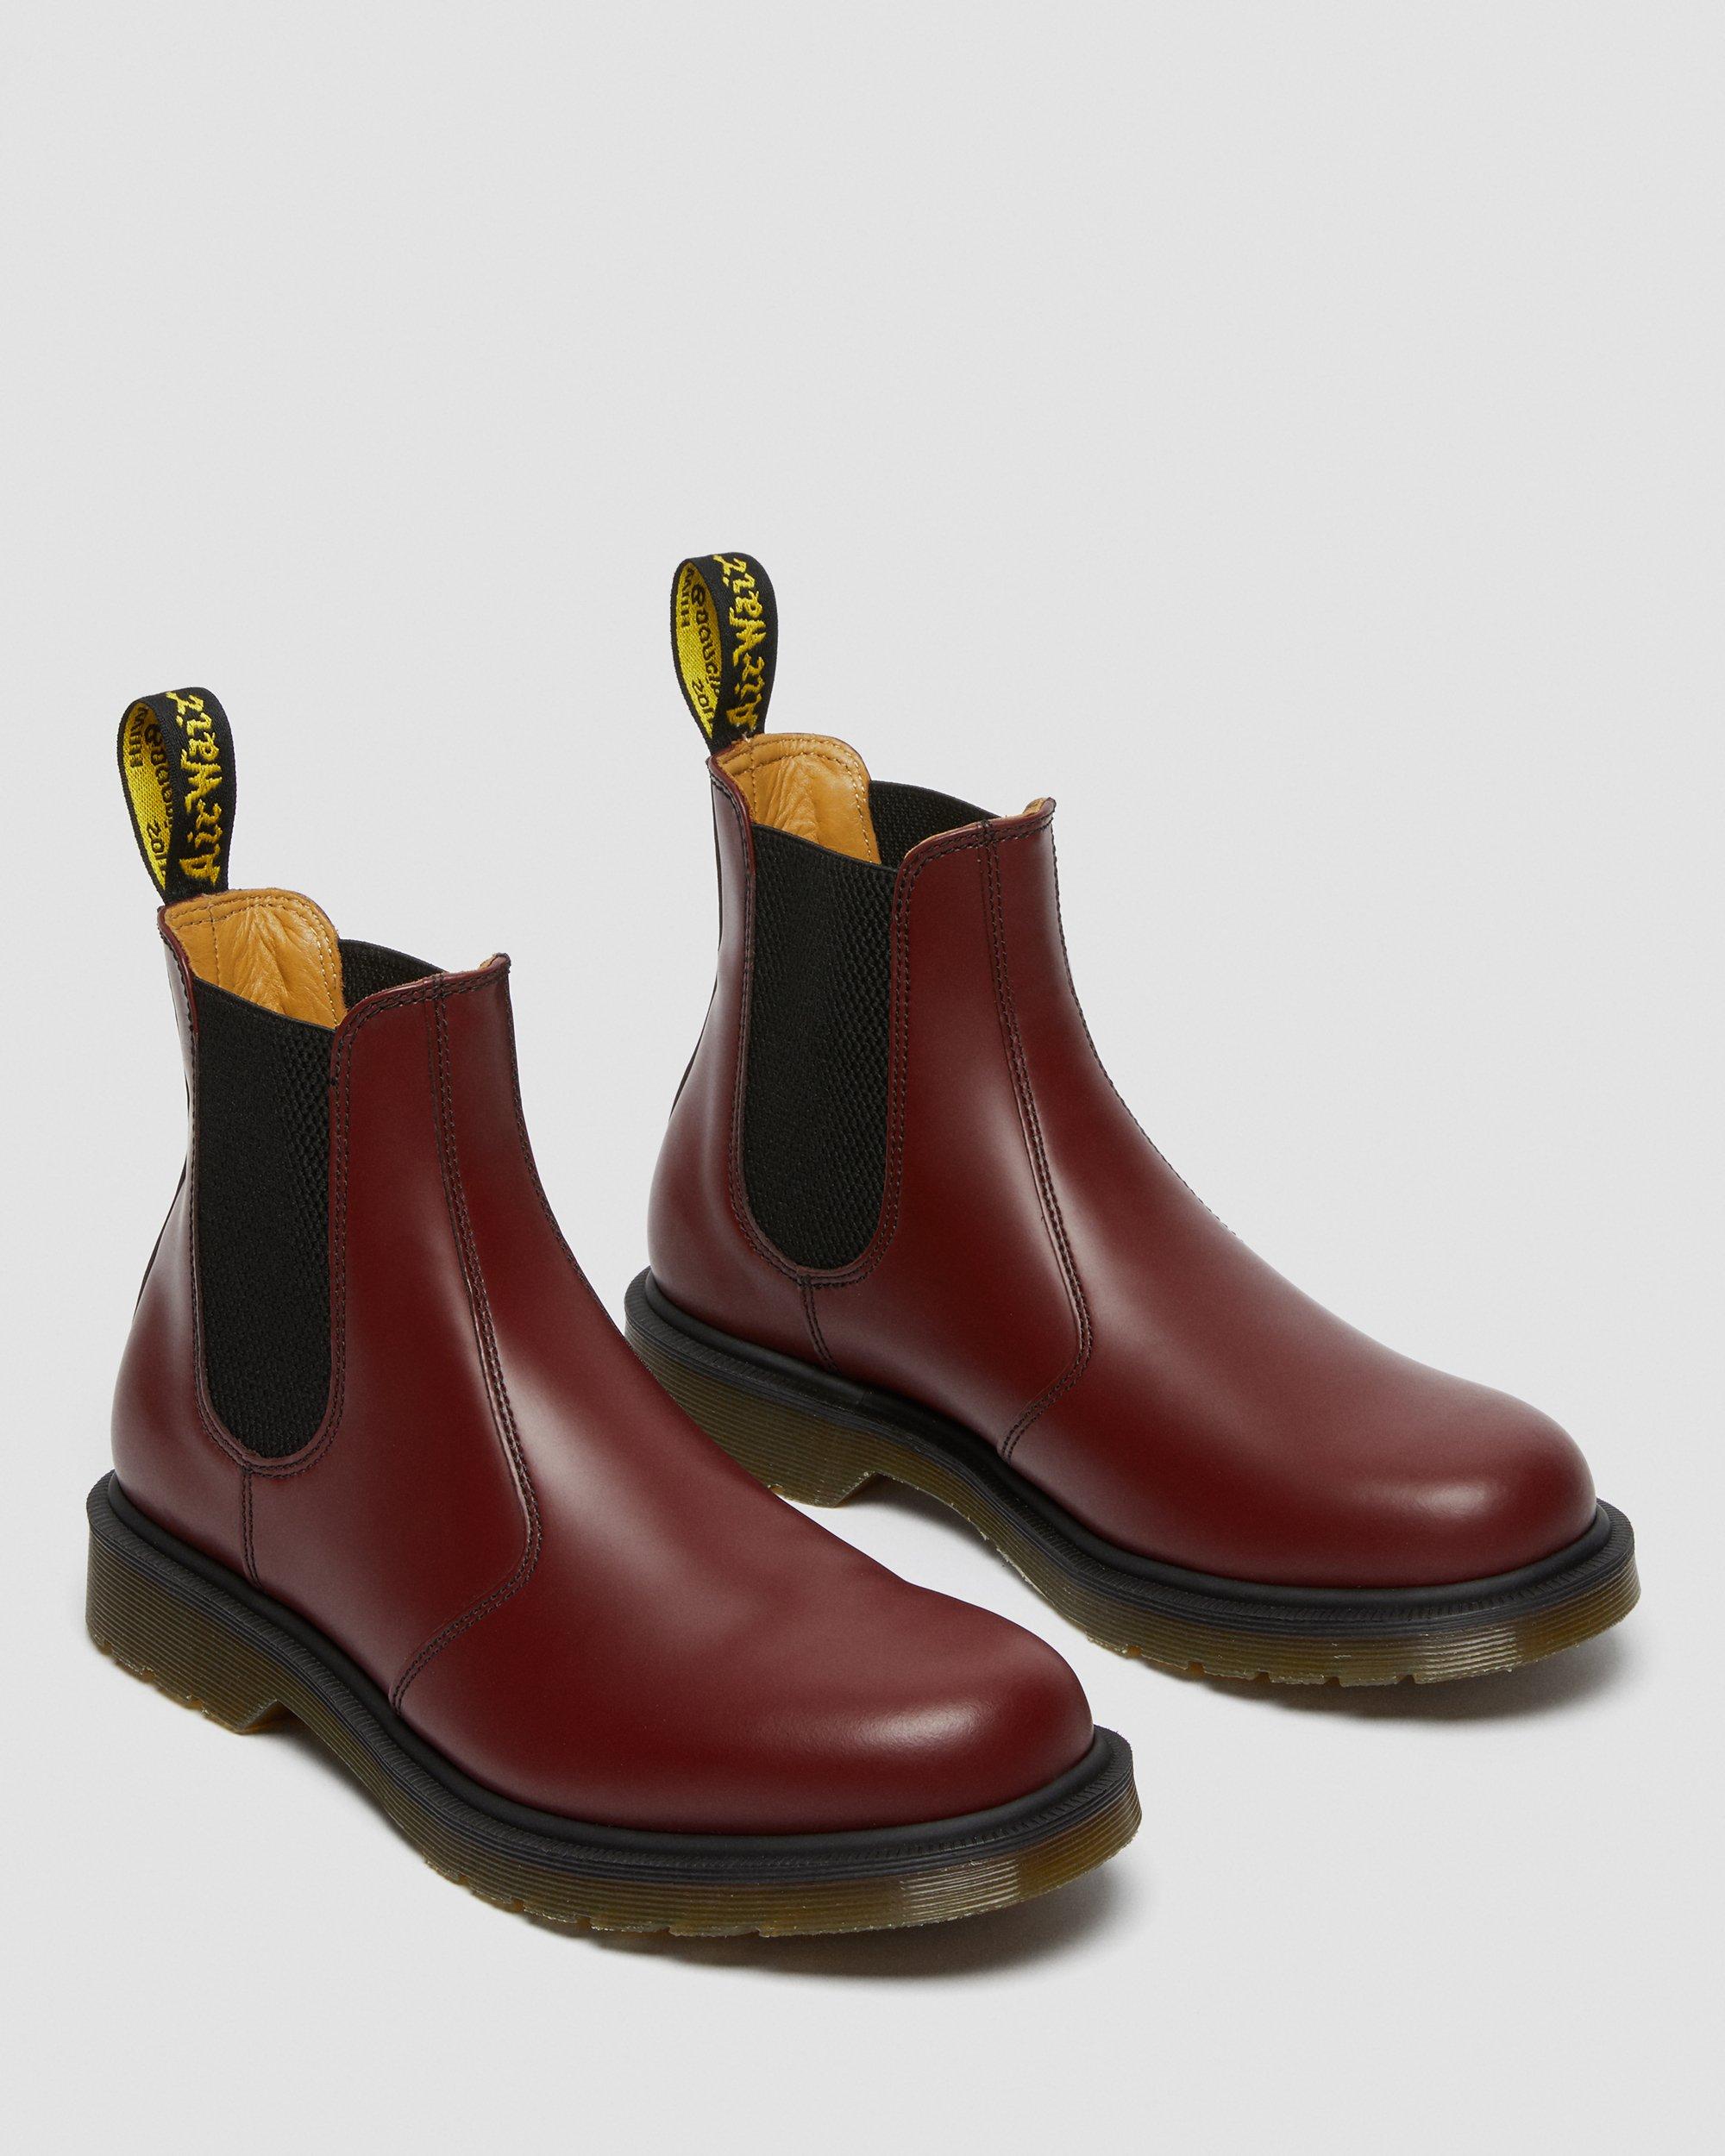 Mens Boots Dr for Men Martens Boots Brown Martens 2976 Leather Chelsea Boots in Red Dr 